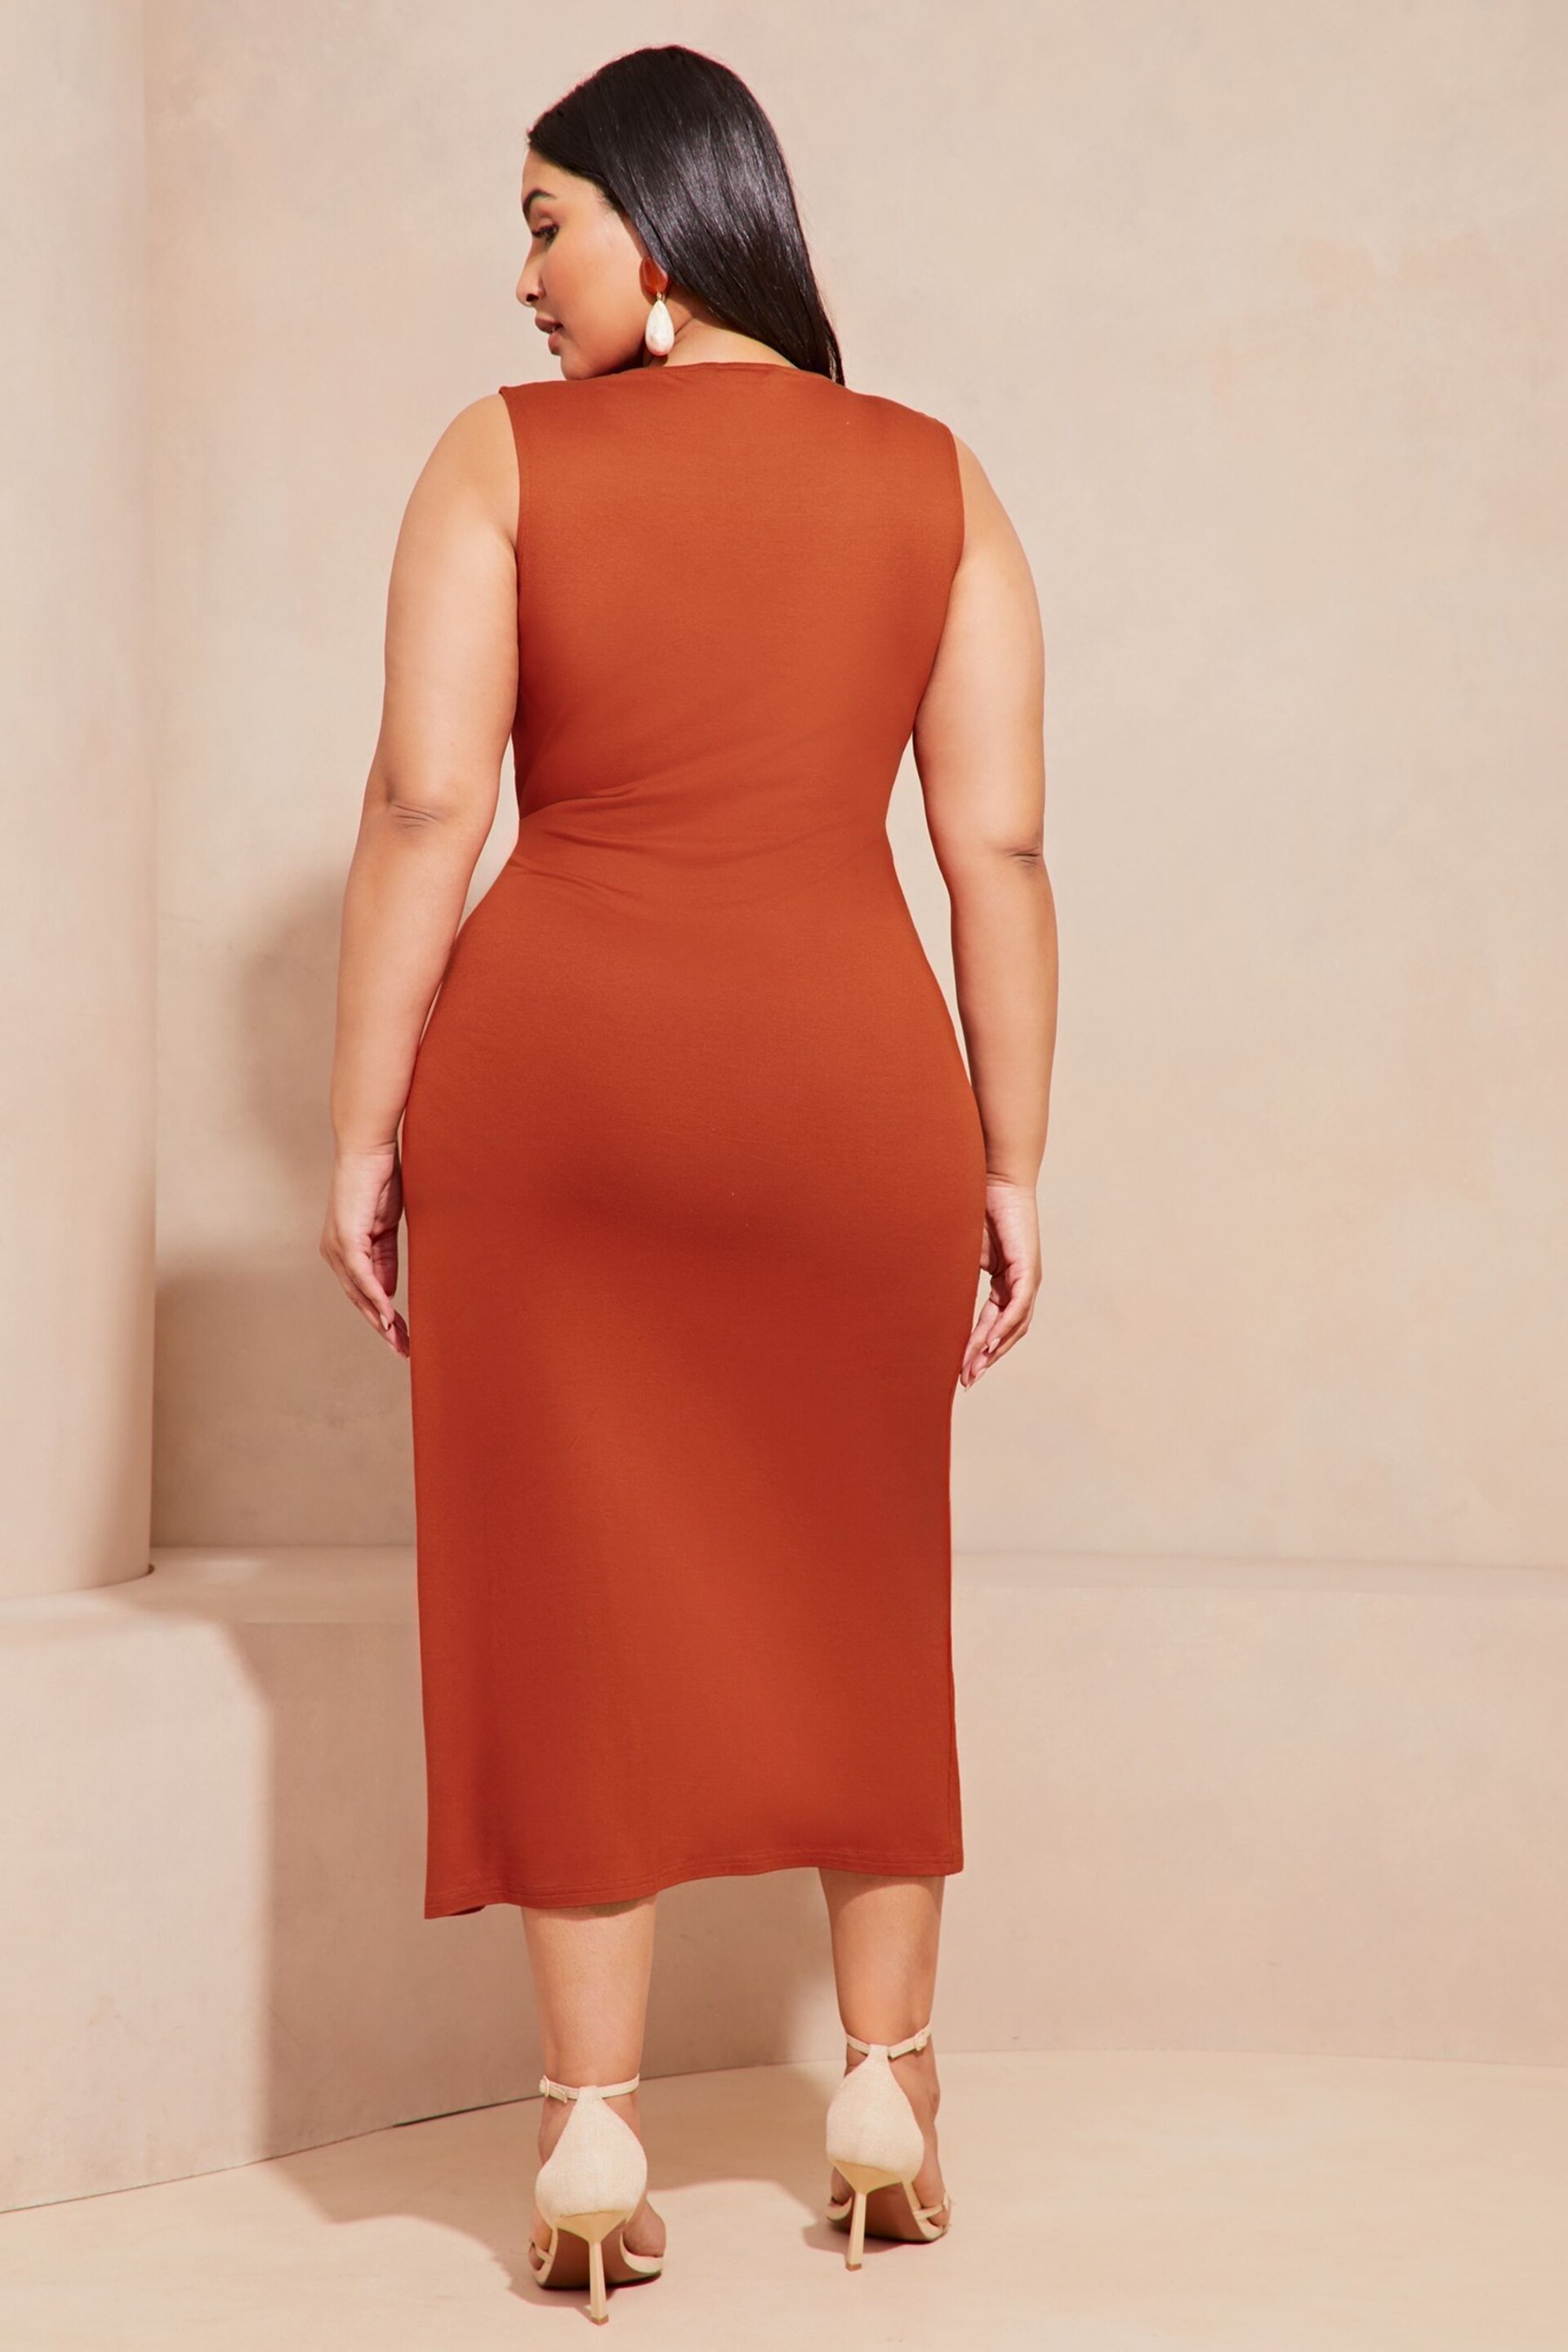 Lipsy Red Curve Sleeveless Racer Tie Side Jersey Midi Dress - Image 2 of 4